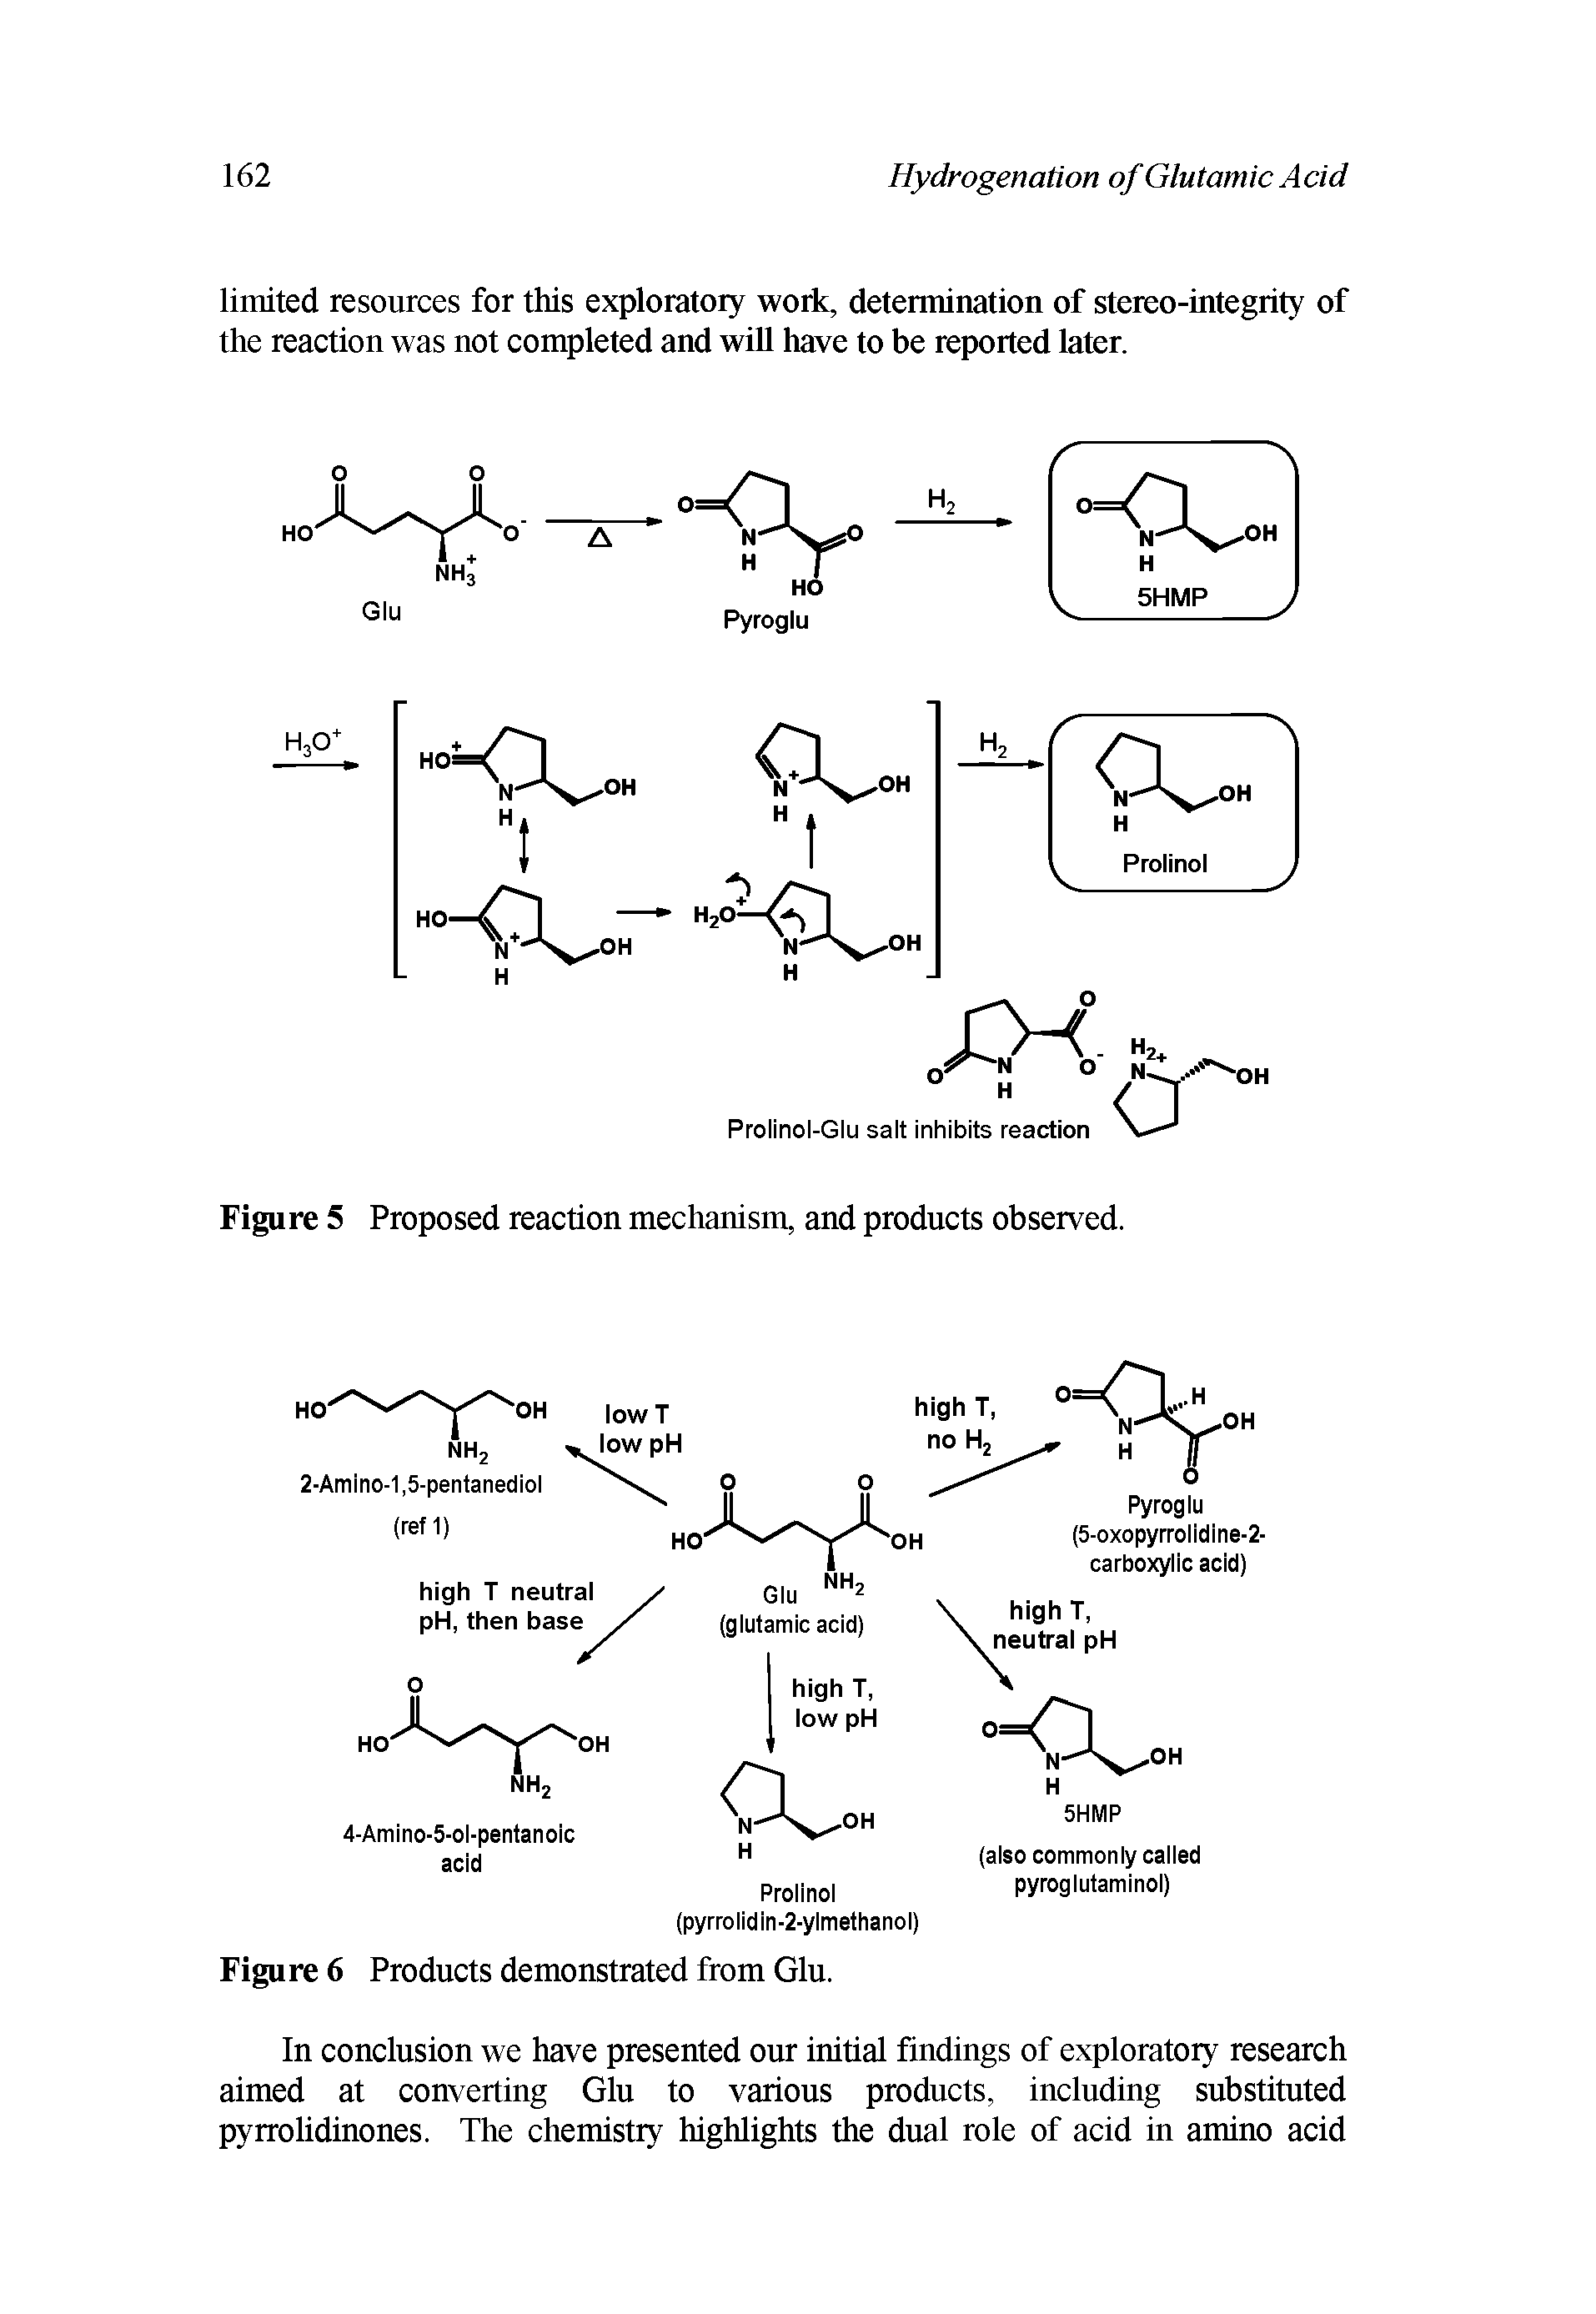 Figure 5 Proposed reaction mechanism, and products observed.